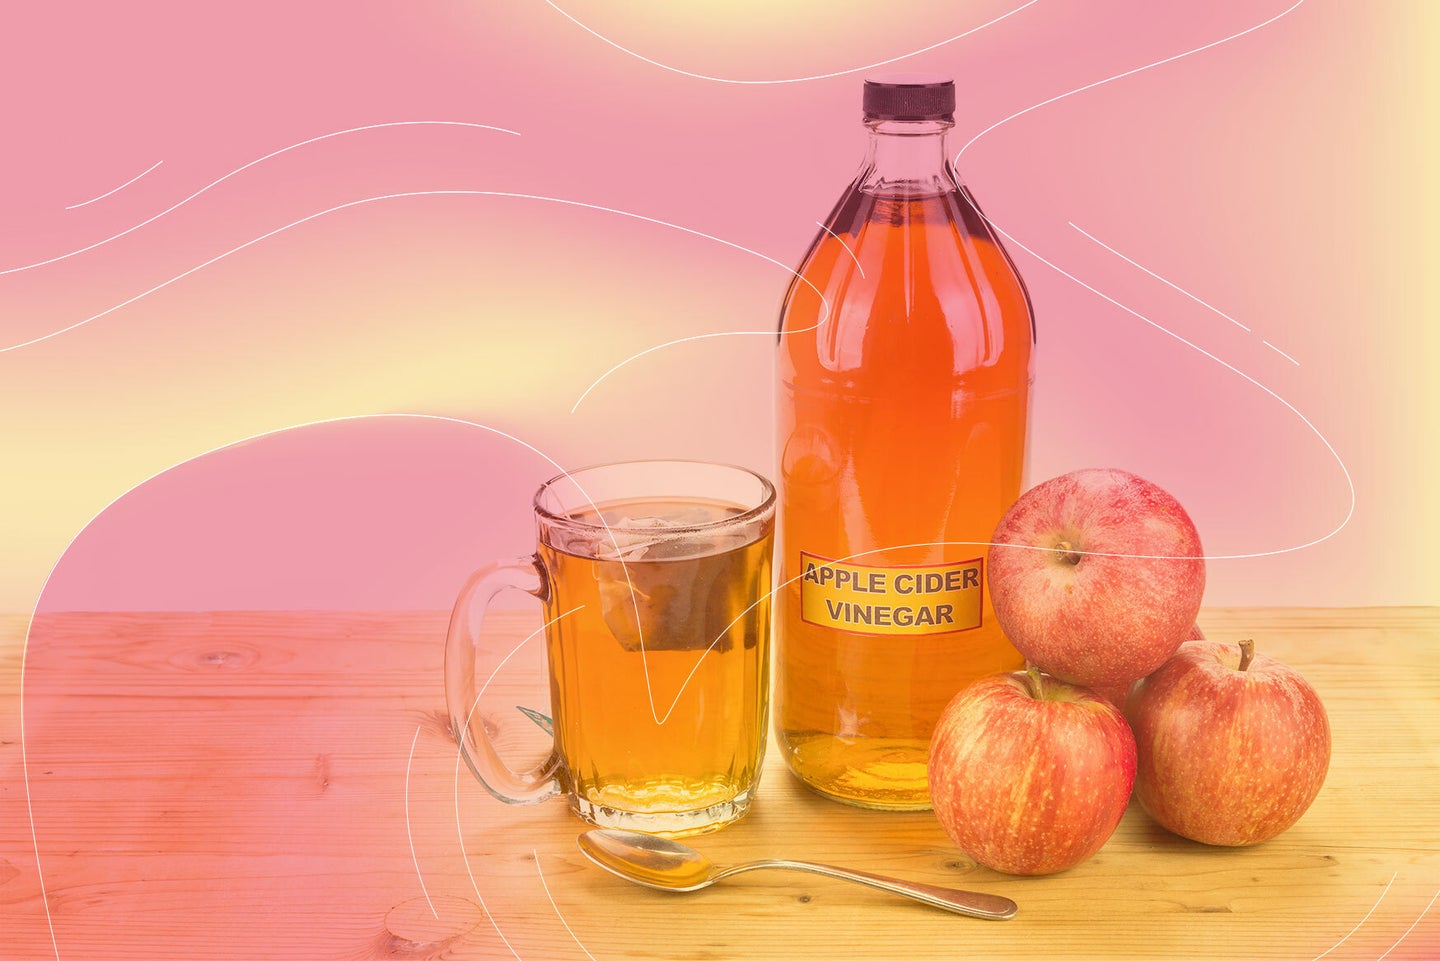 a bottle of yellow liquid labeled "apple cider vinegar" next to a full glass and a pile of red apples